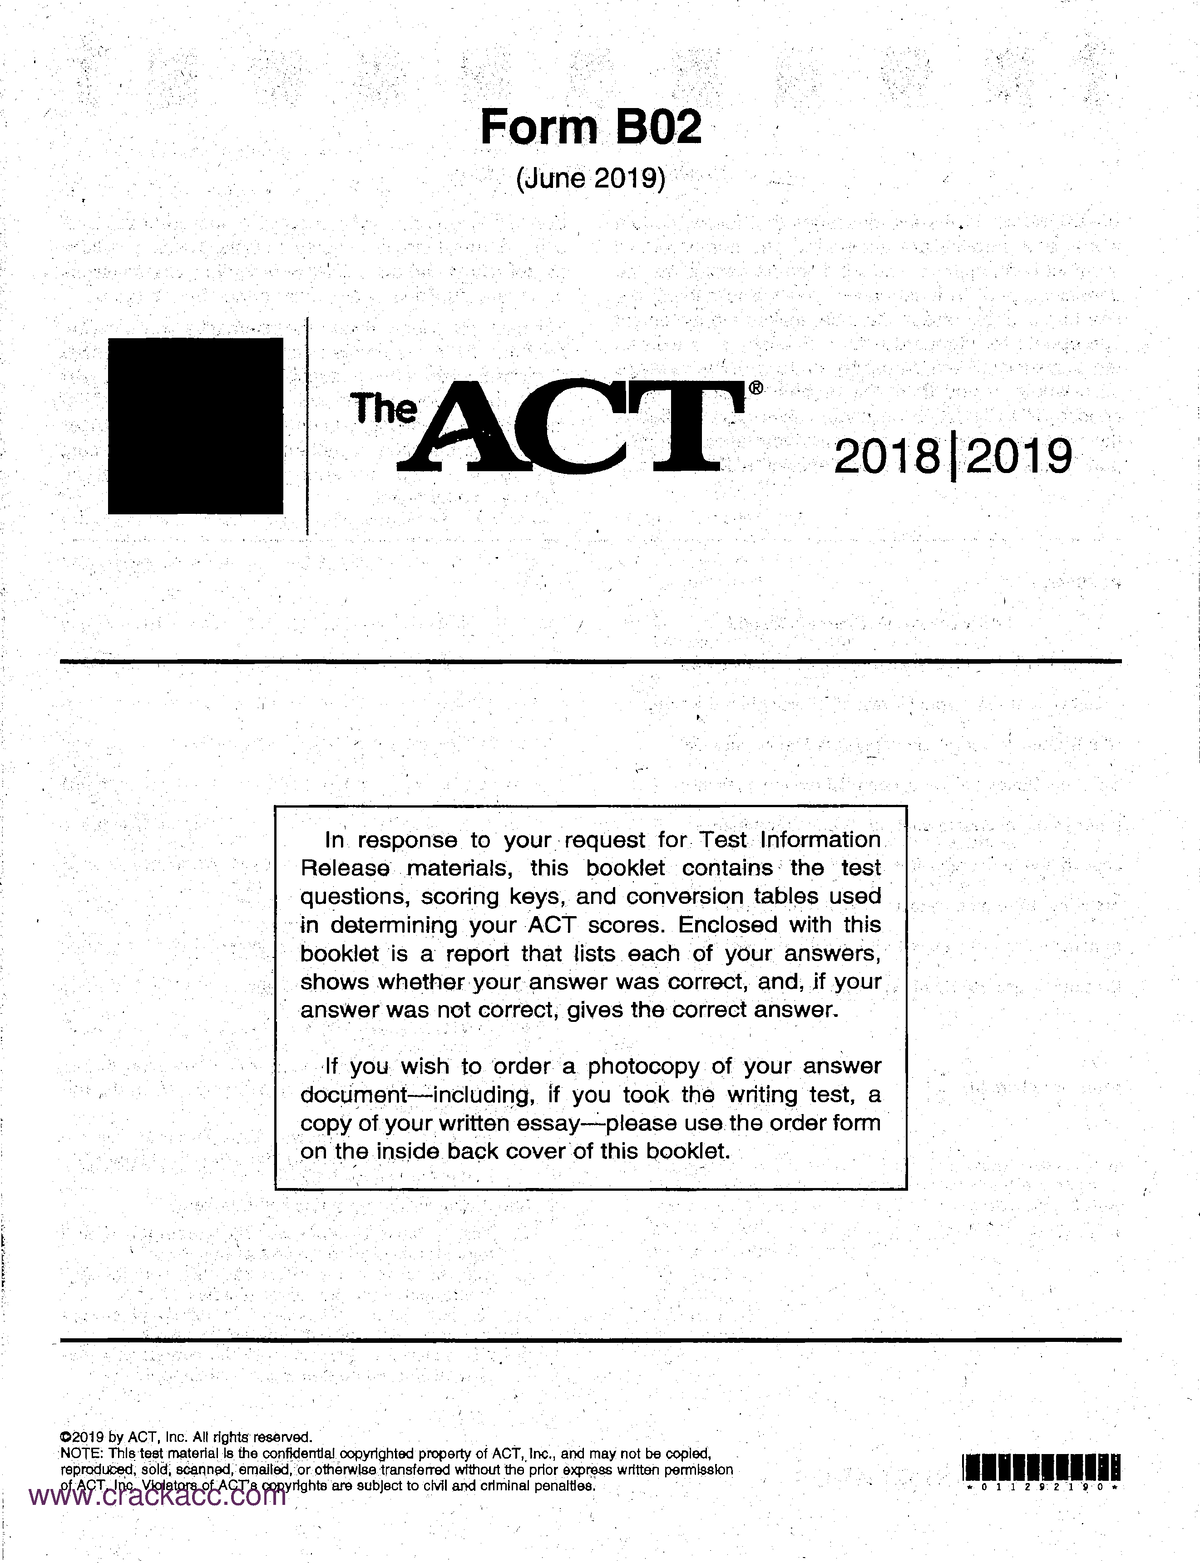 ACT 2019 06 Form B02 ACT test B02 Form 802 (June 2019) 2018( In